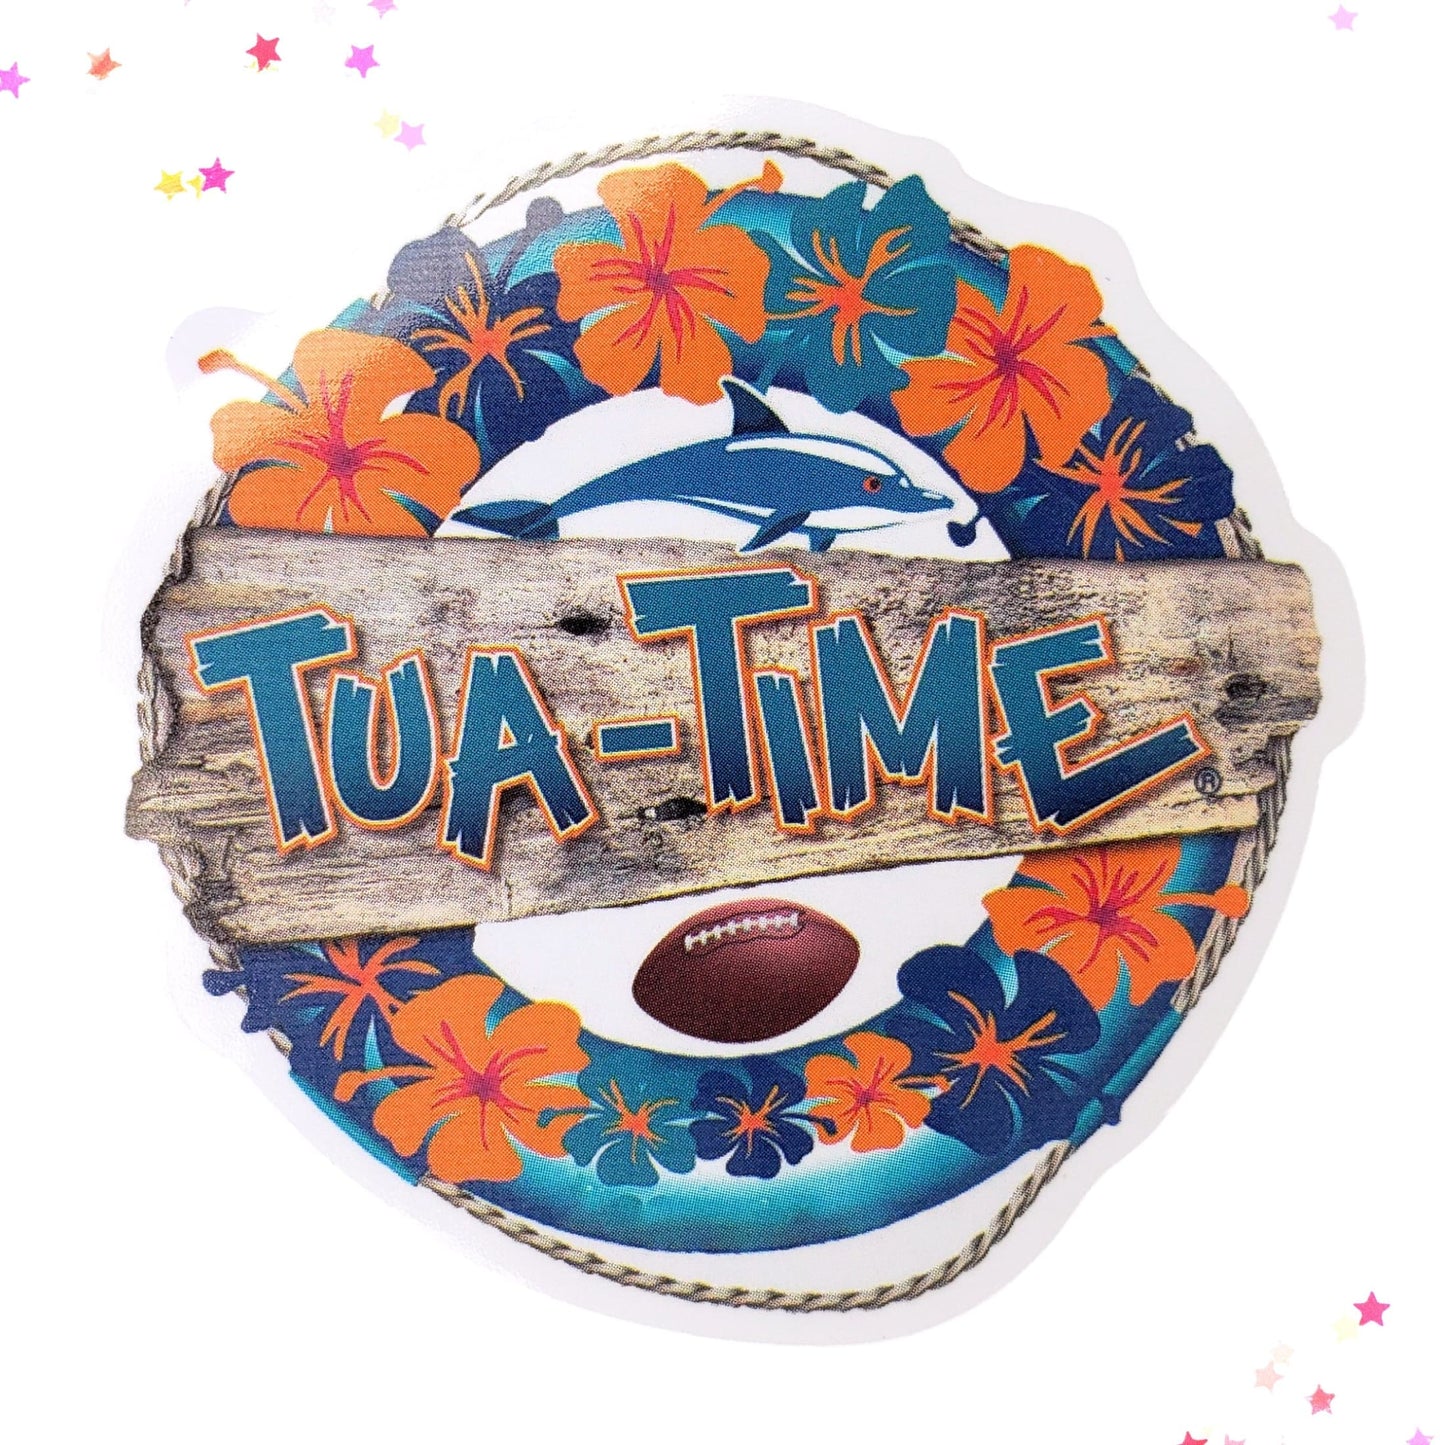 Tua-Time Waterproof Sticker from Confetti Kitty, Only 1.00